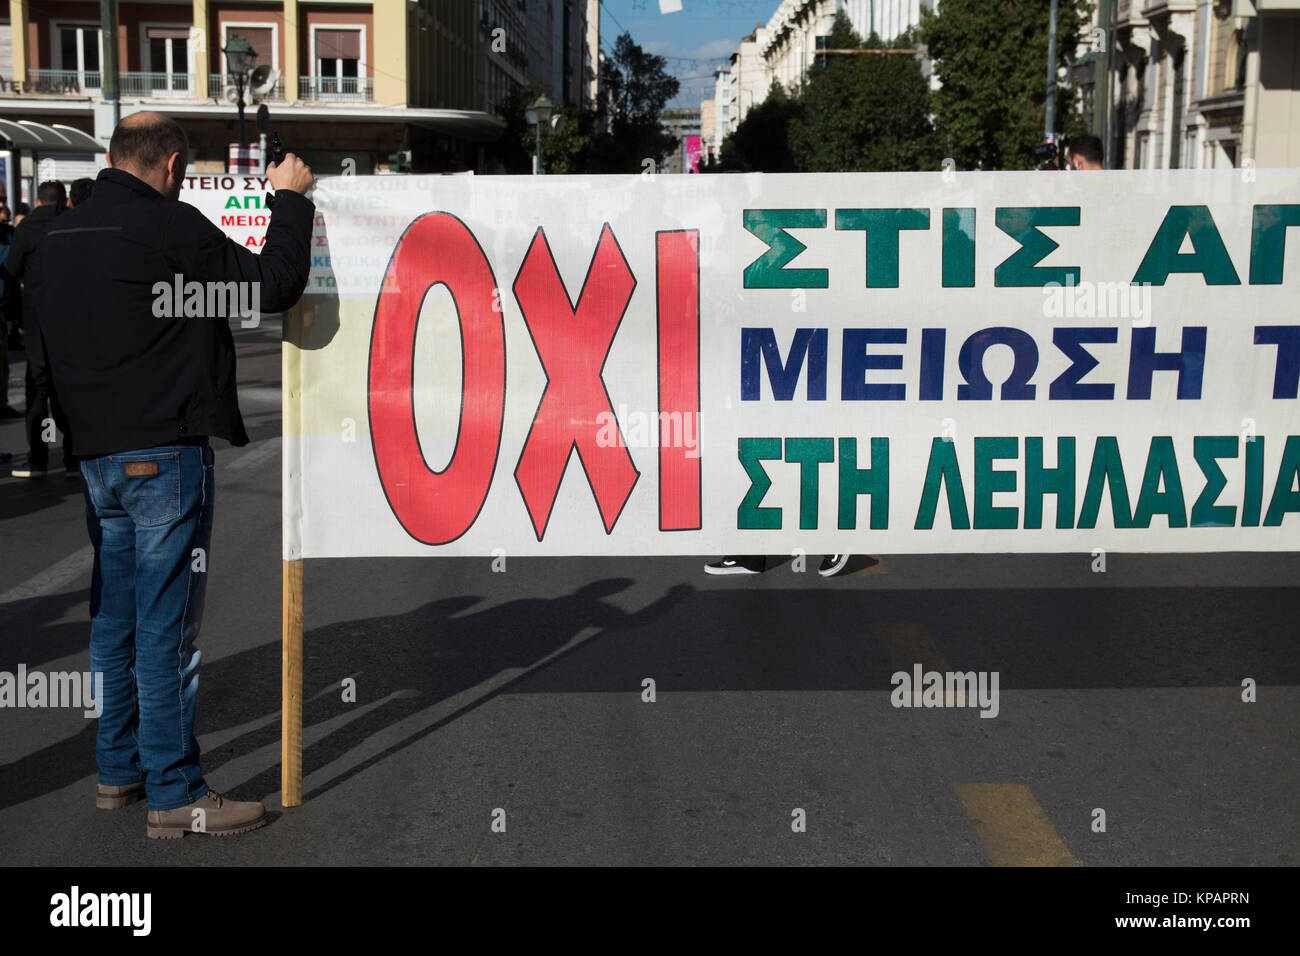 A banner reads 'OXI', meaning 'No', as thousands took to the streets participating in a 24 hour general strike organized by private and public sector unions, protesting against the government's recent attempt to amend labor laws, making it more difficult for unions to go on strike. © Nikolas Georgiou / Alamy Live News Stock Photo